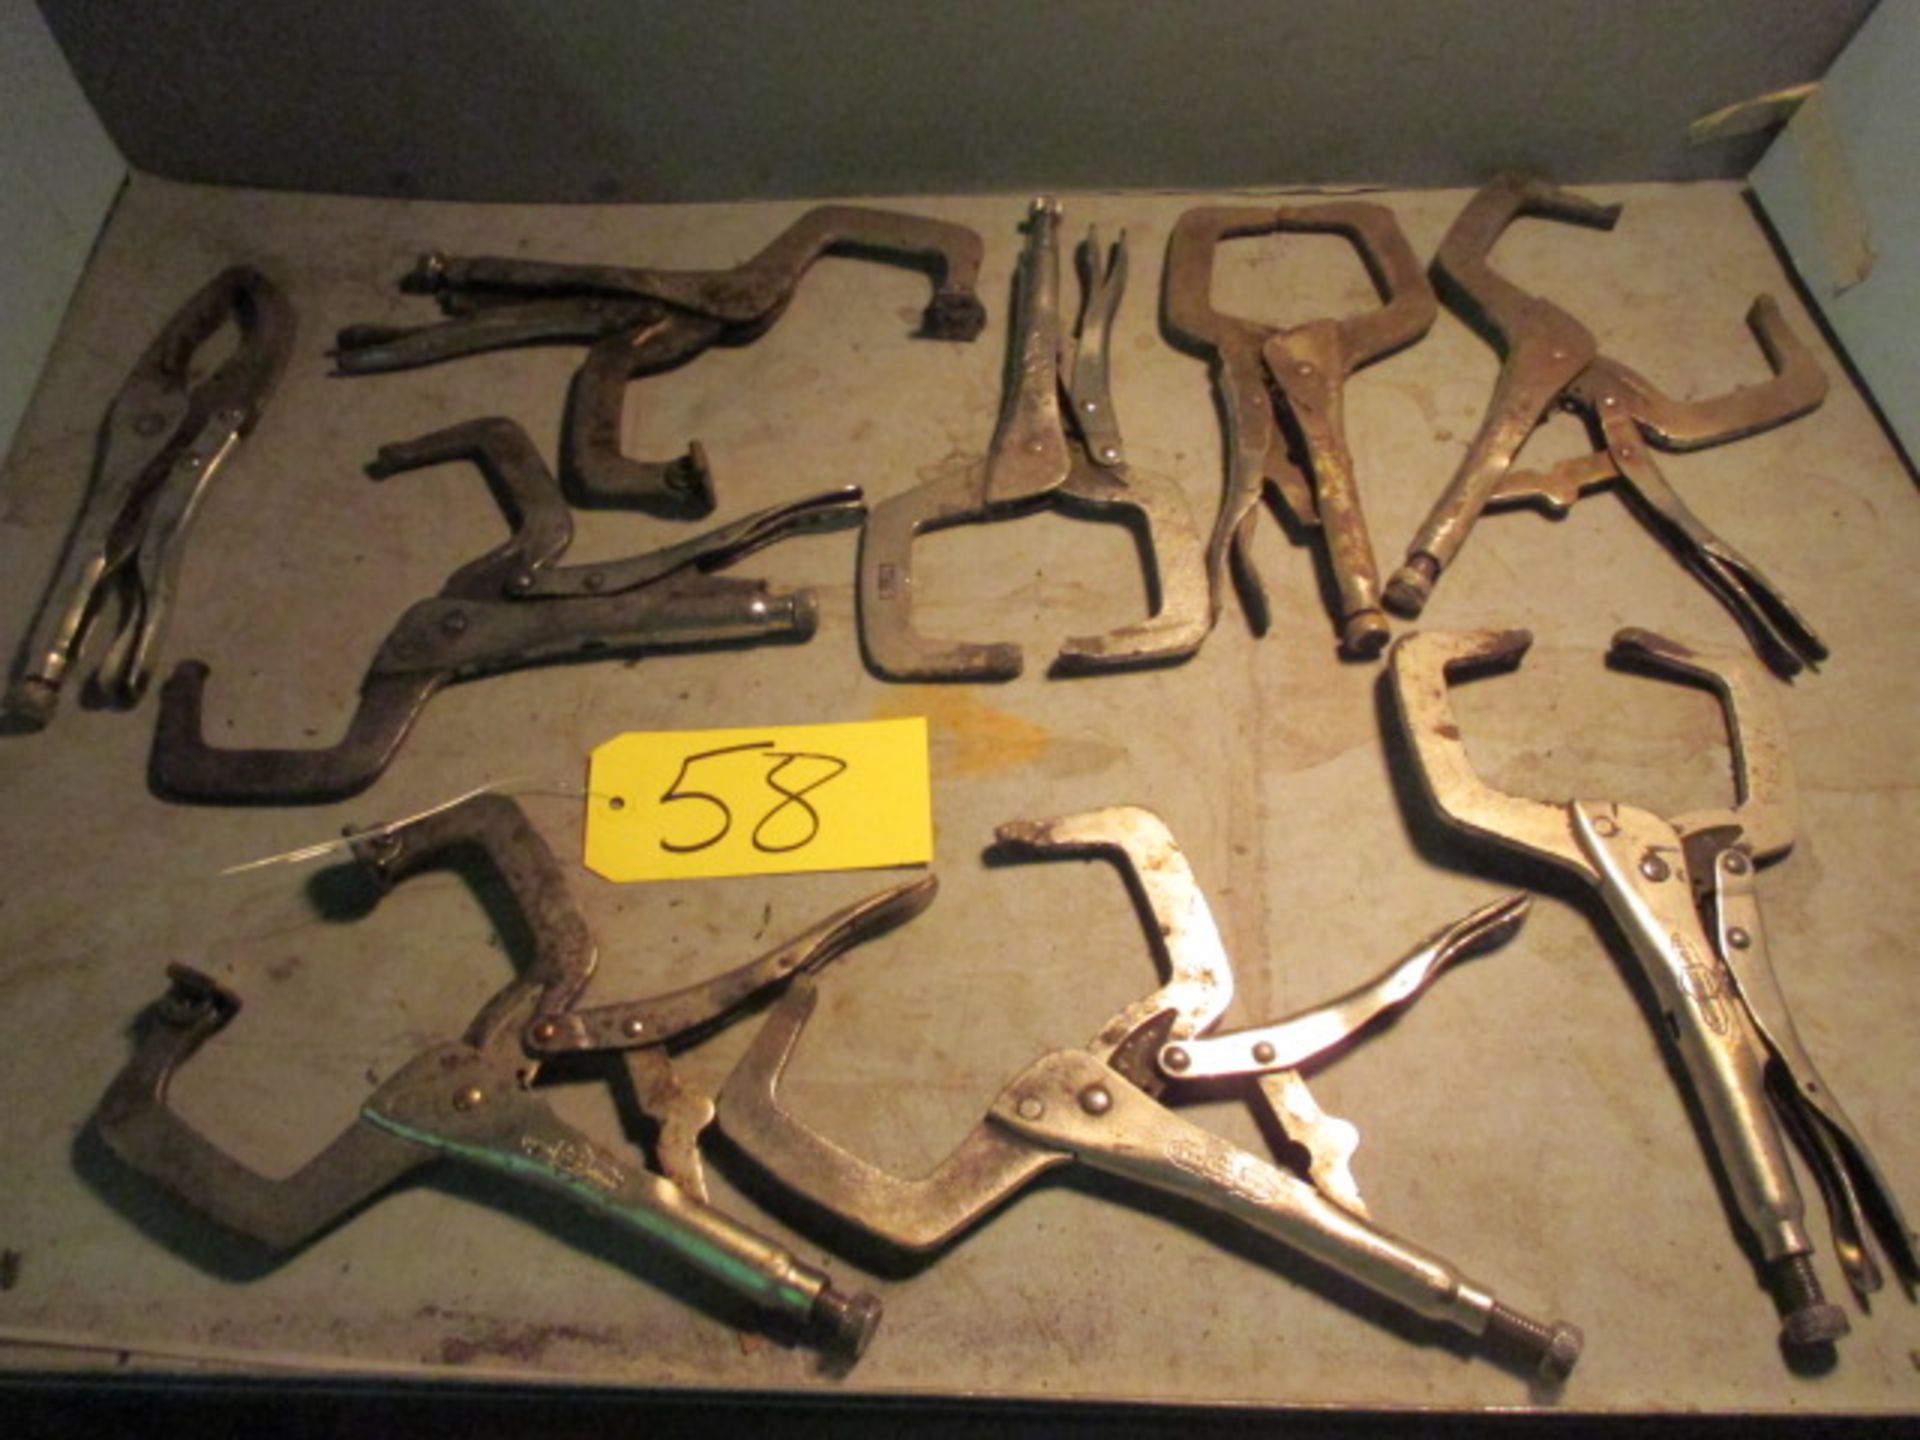 Approximately (9) vise grips.